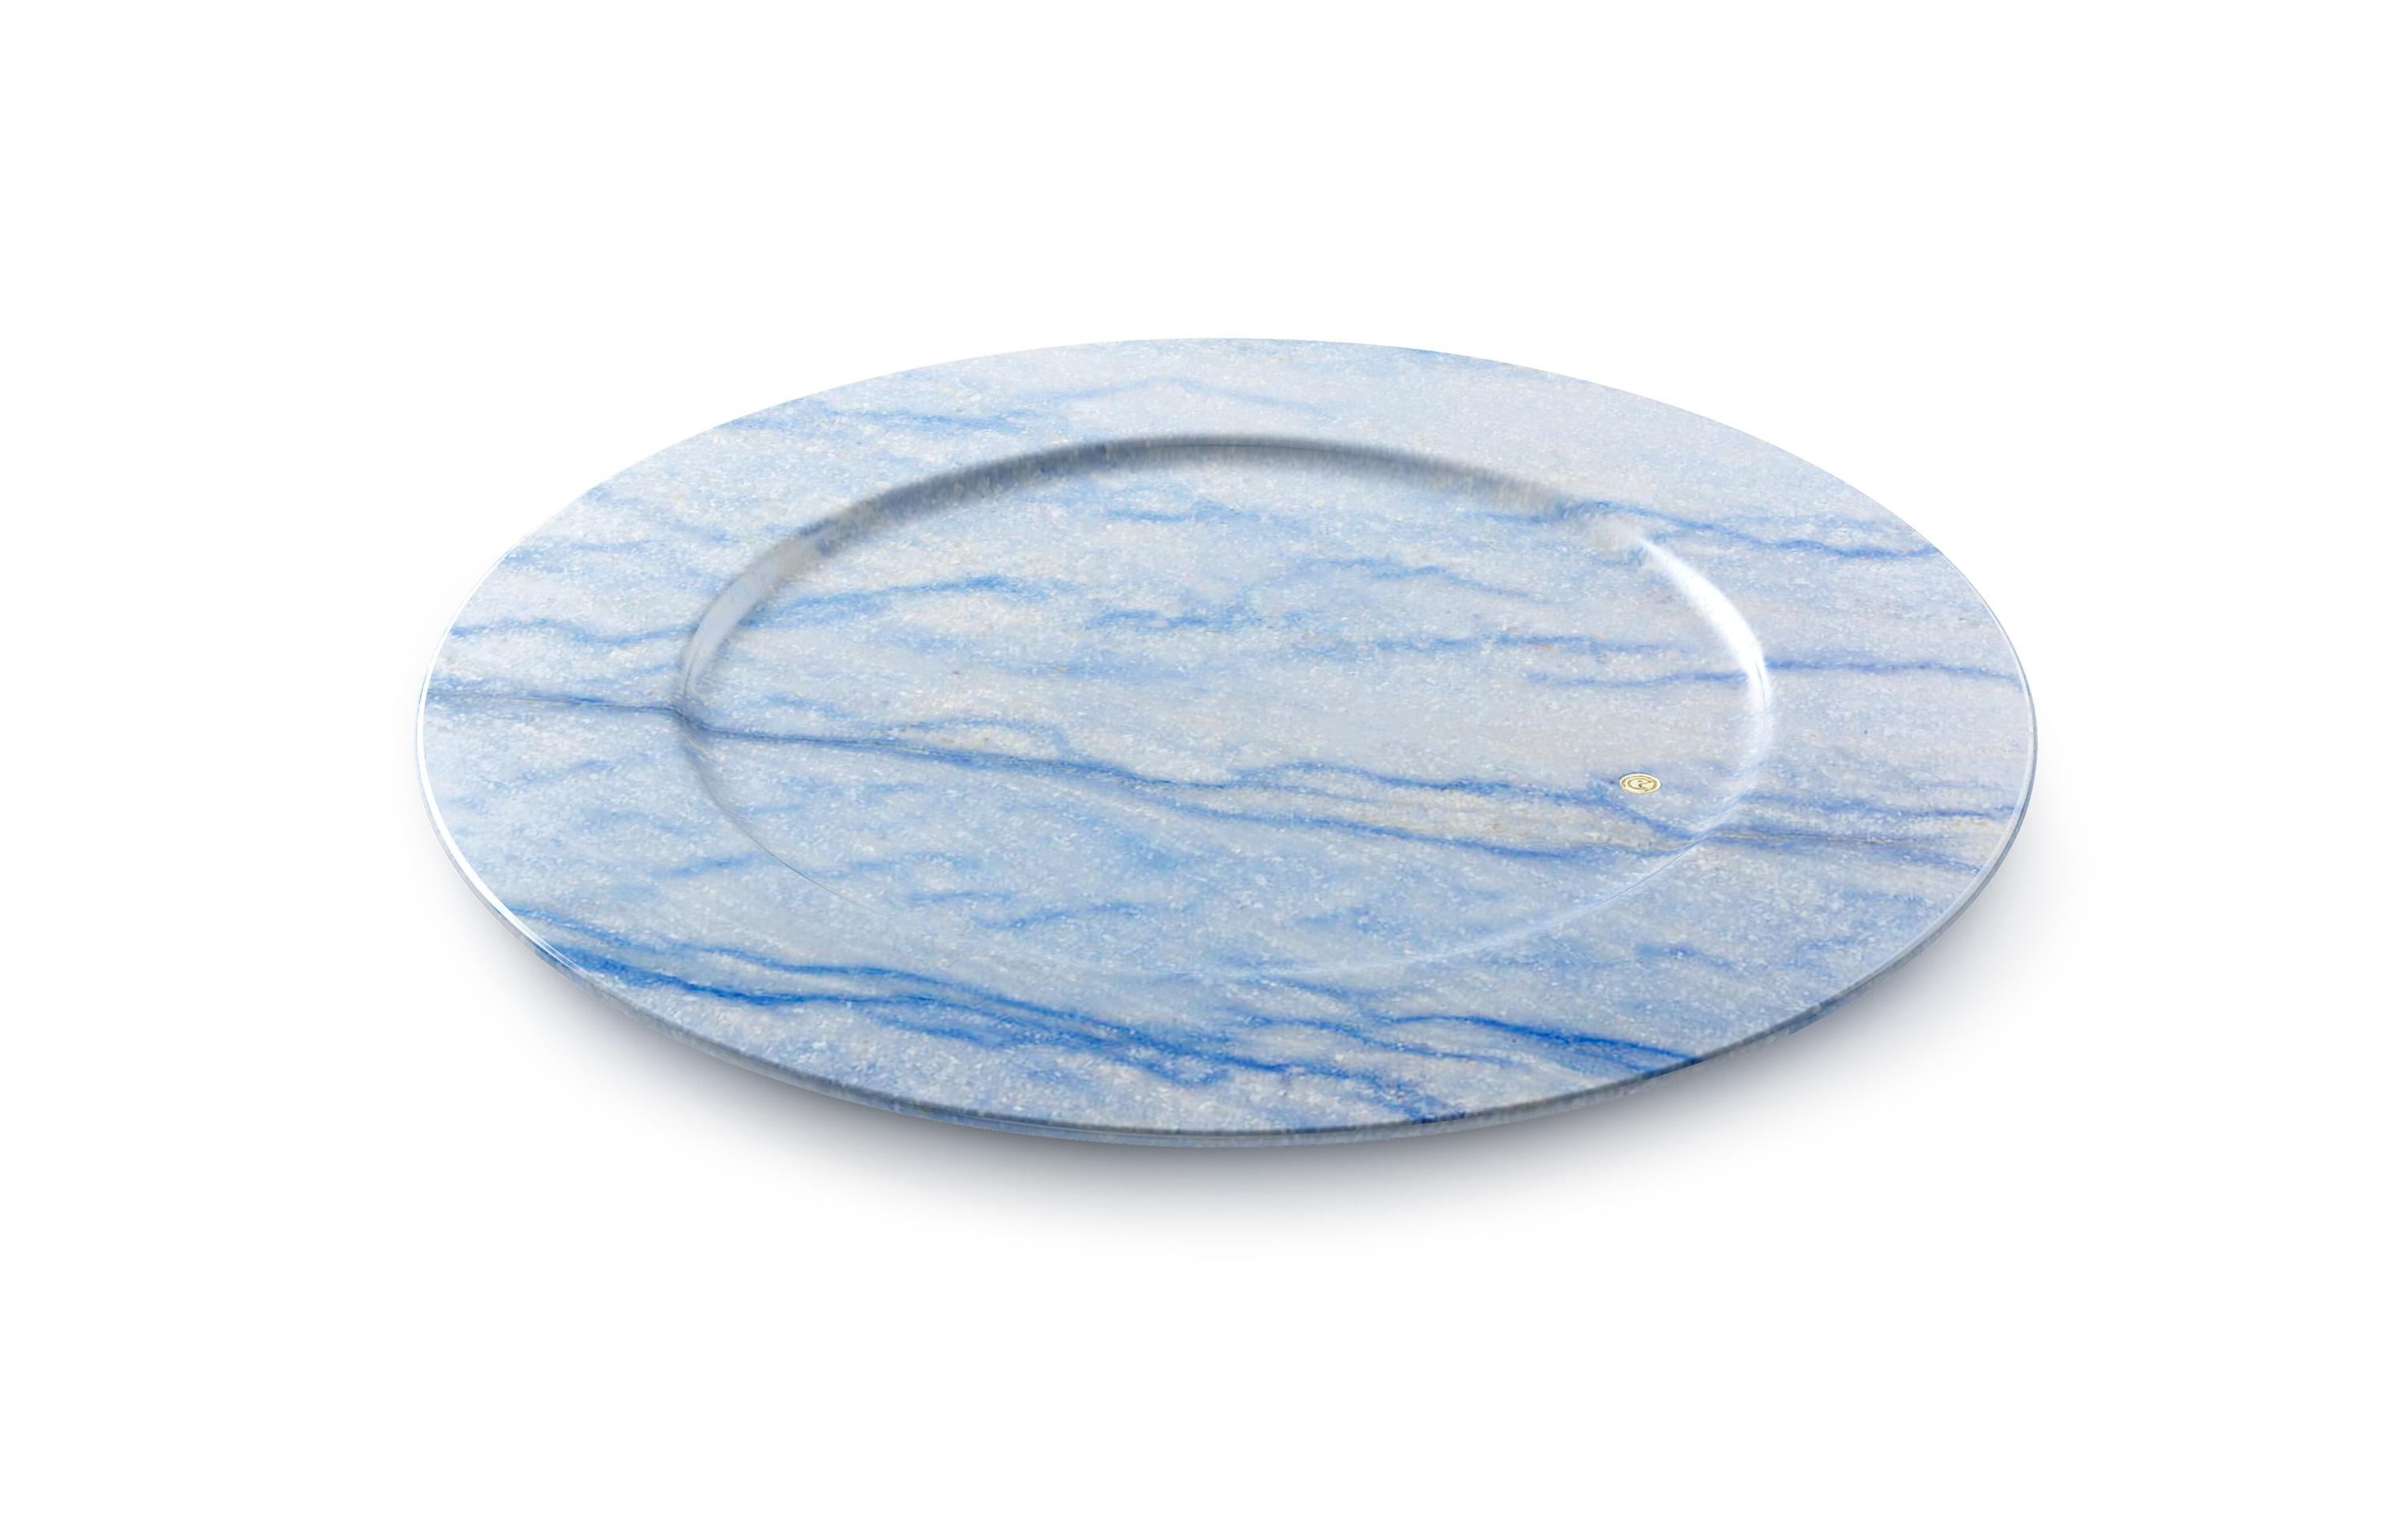 Hand-Carved Charger Plate Platters Serveware Set of 4 Blue Azul Macaubas Marble Handmade For Sale